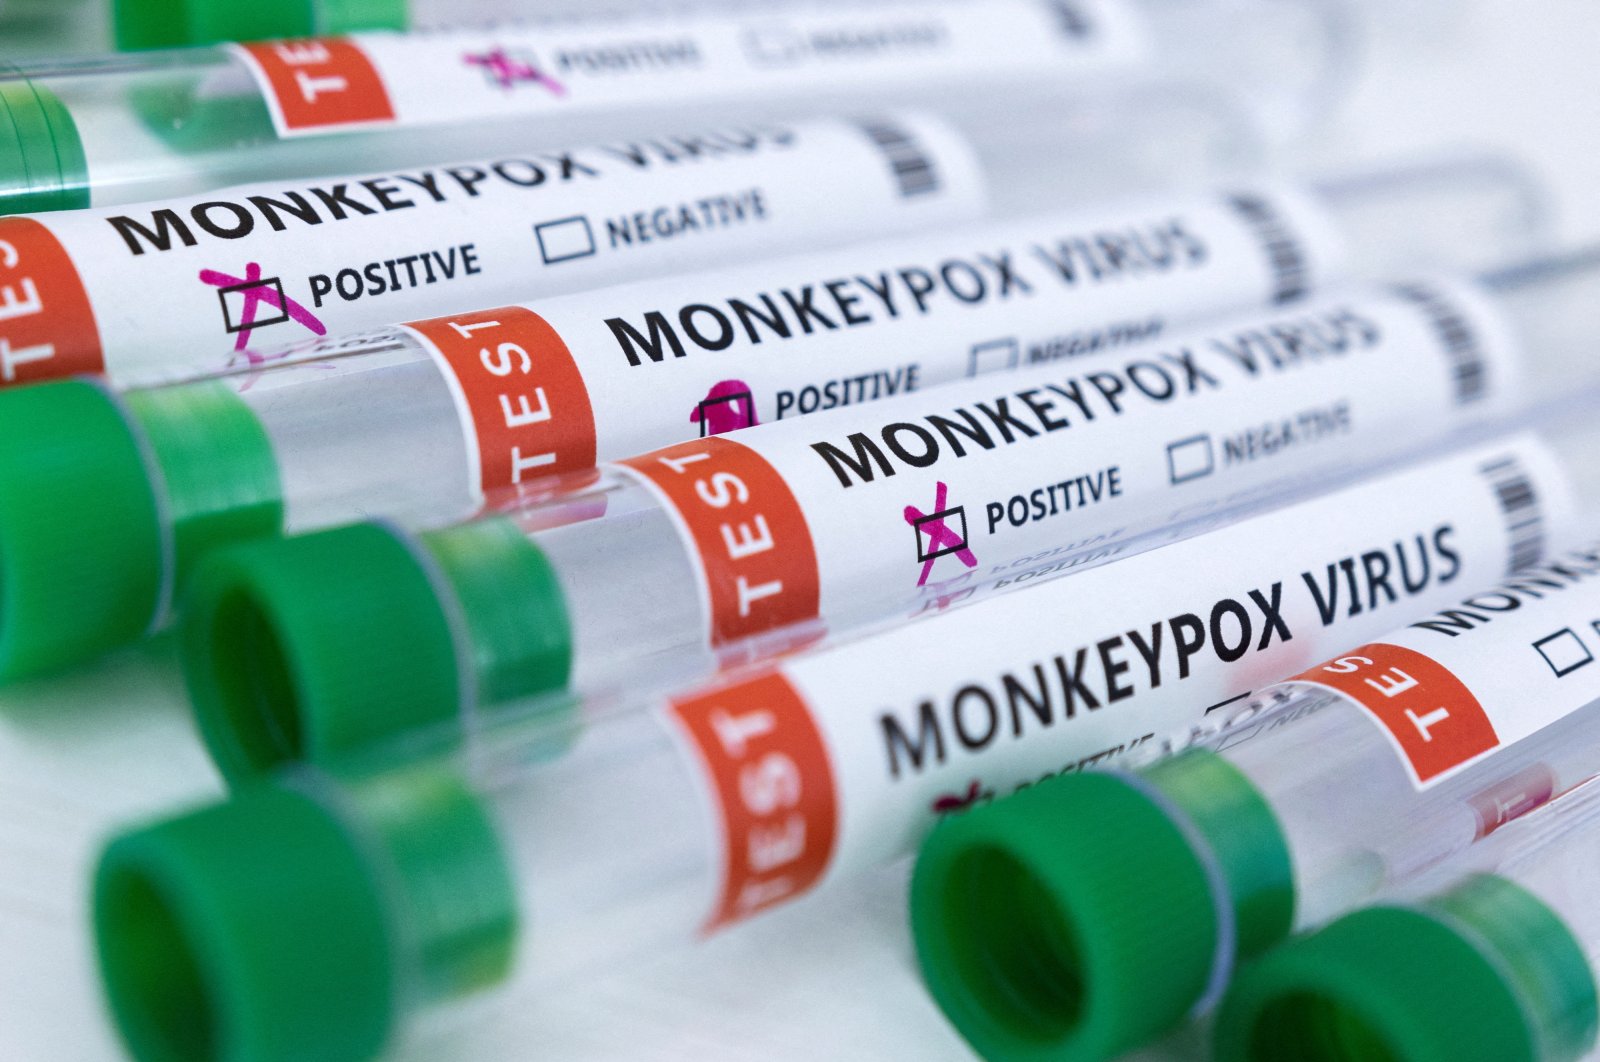 Test tubes labeled &quot;monkeypox virus positive and negative&quot; are seen in this illustration taken May 23, 2022. (Reuters Photo)